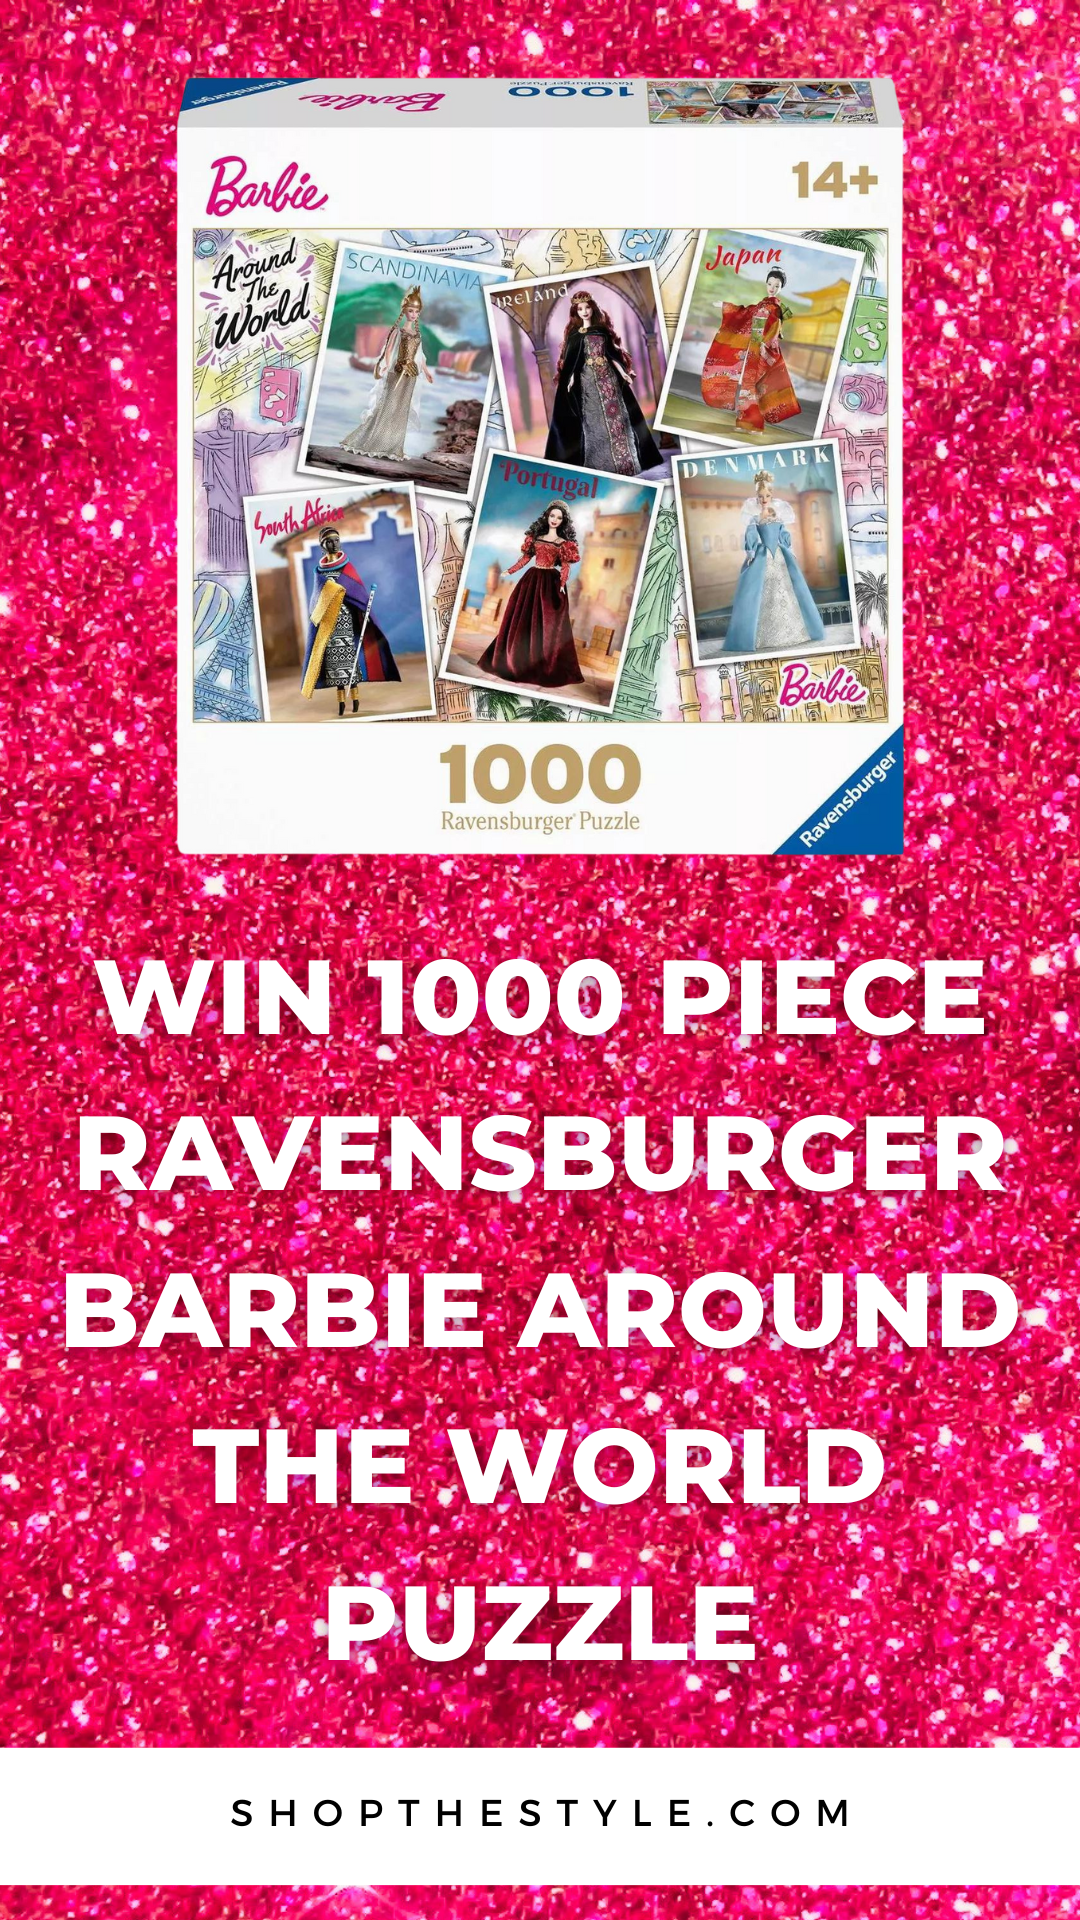 Ravensburger Barbie Around The World Puzzle Giveaway